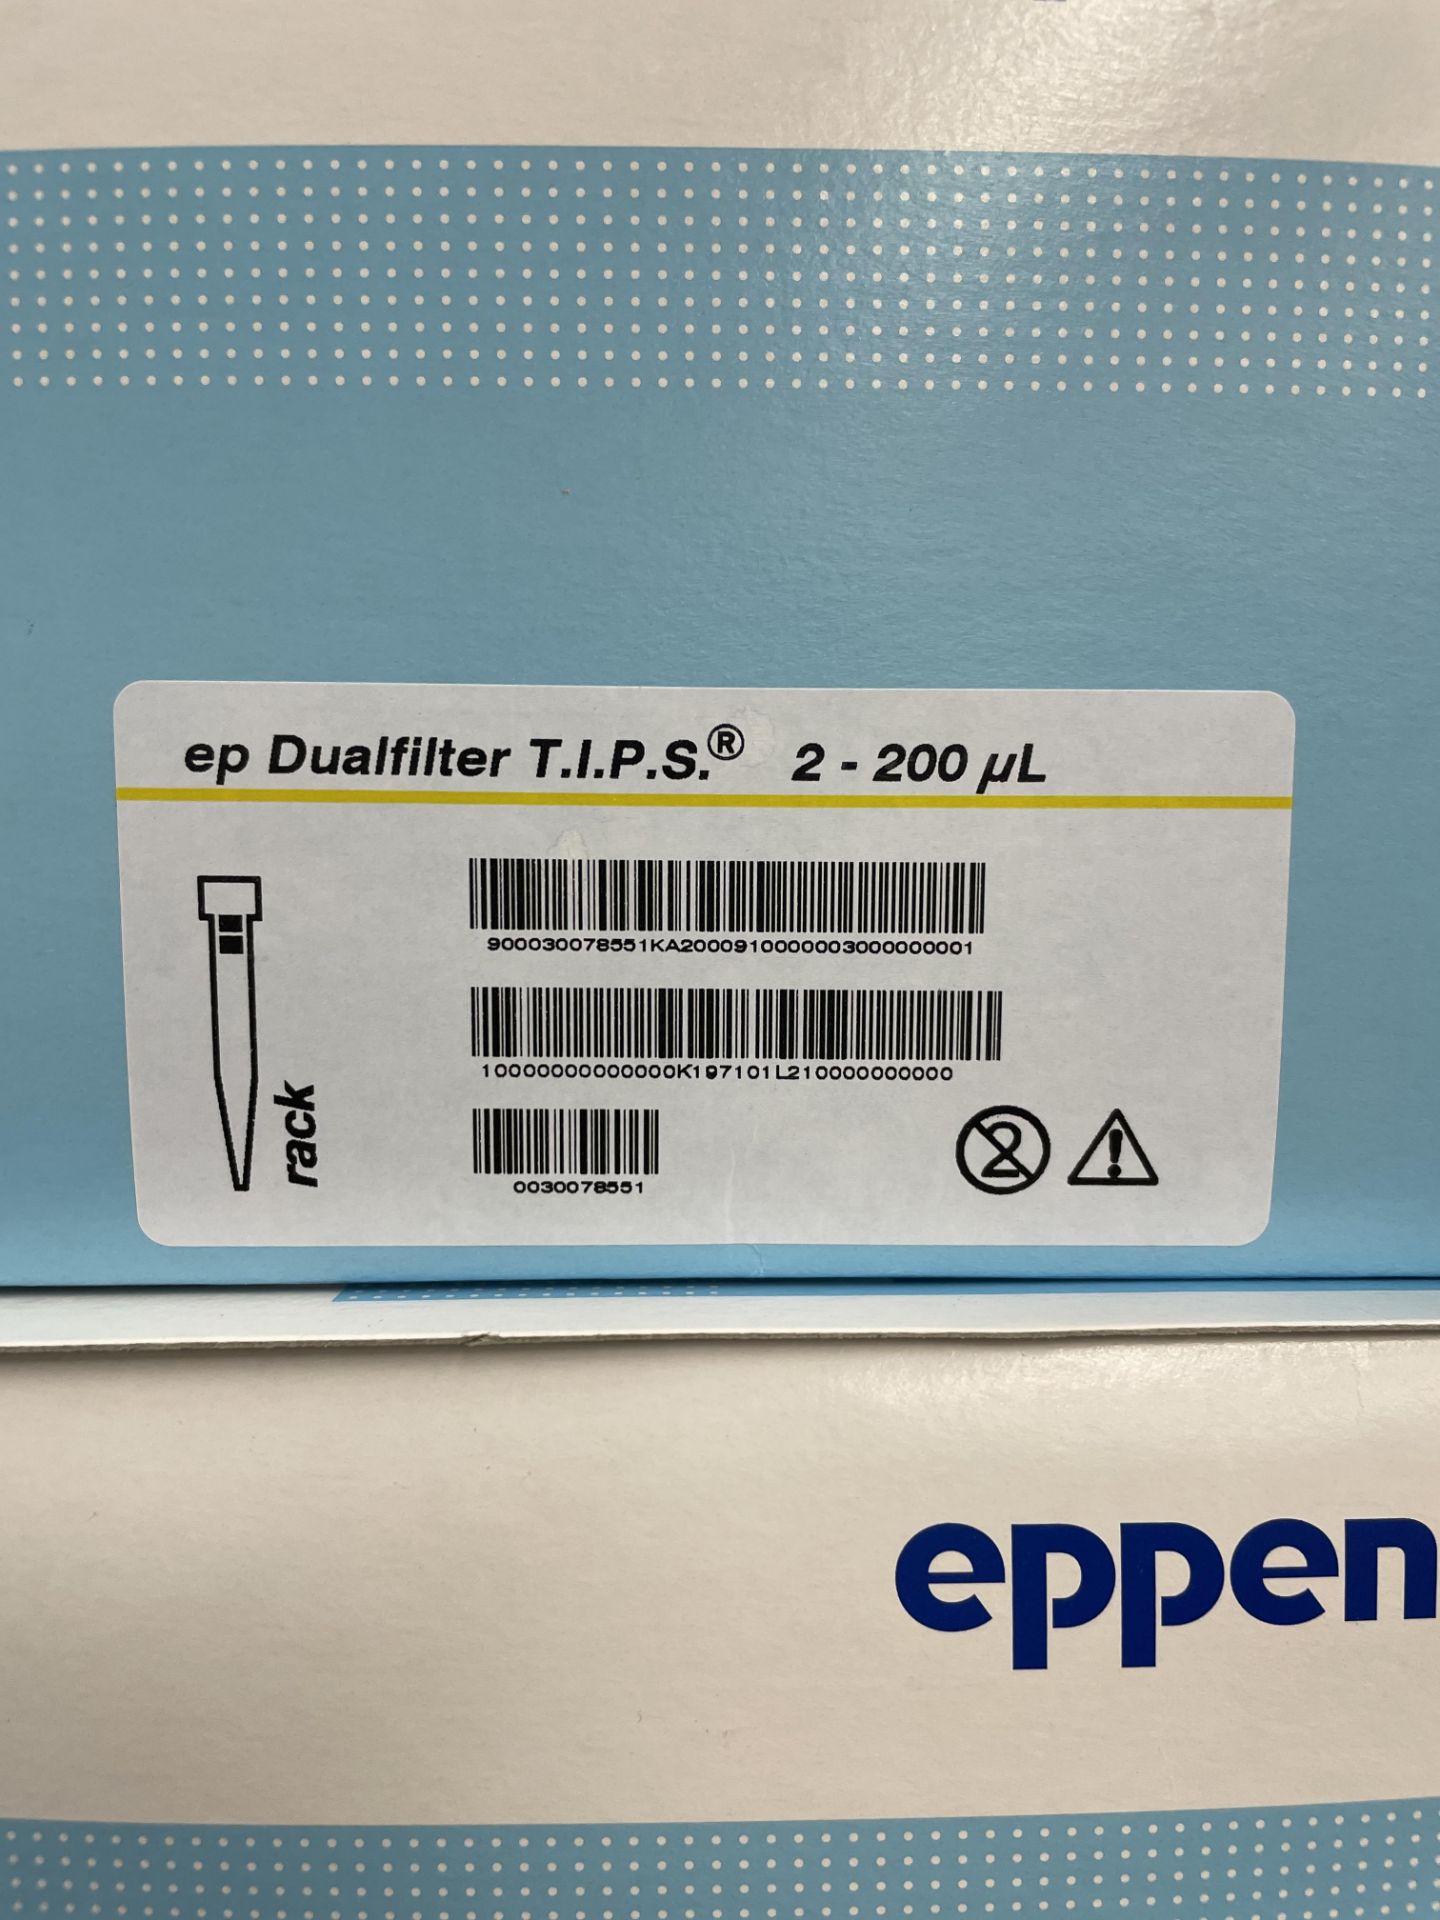 (39) Eppendorf (14) EP Dual Filter Tips. 2-200, (9)0 20-300, (8) 50-1000, (8) .5-10m - Image 4 of 7